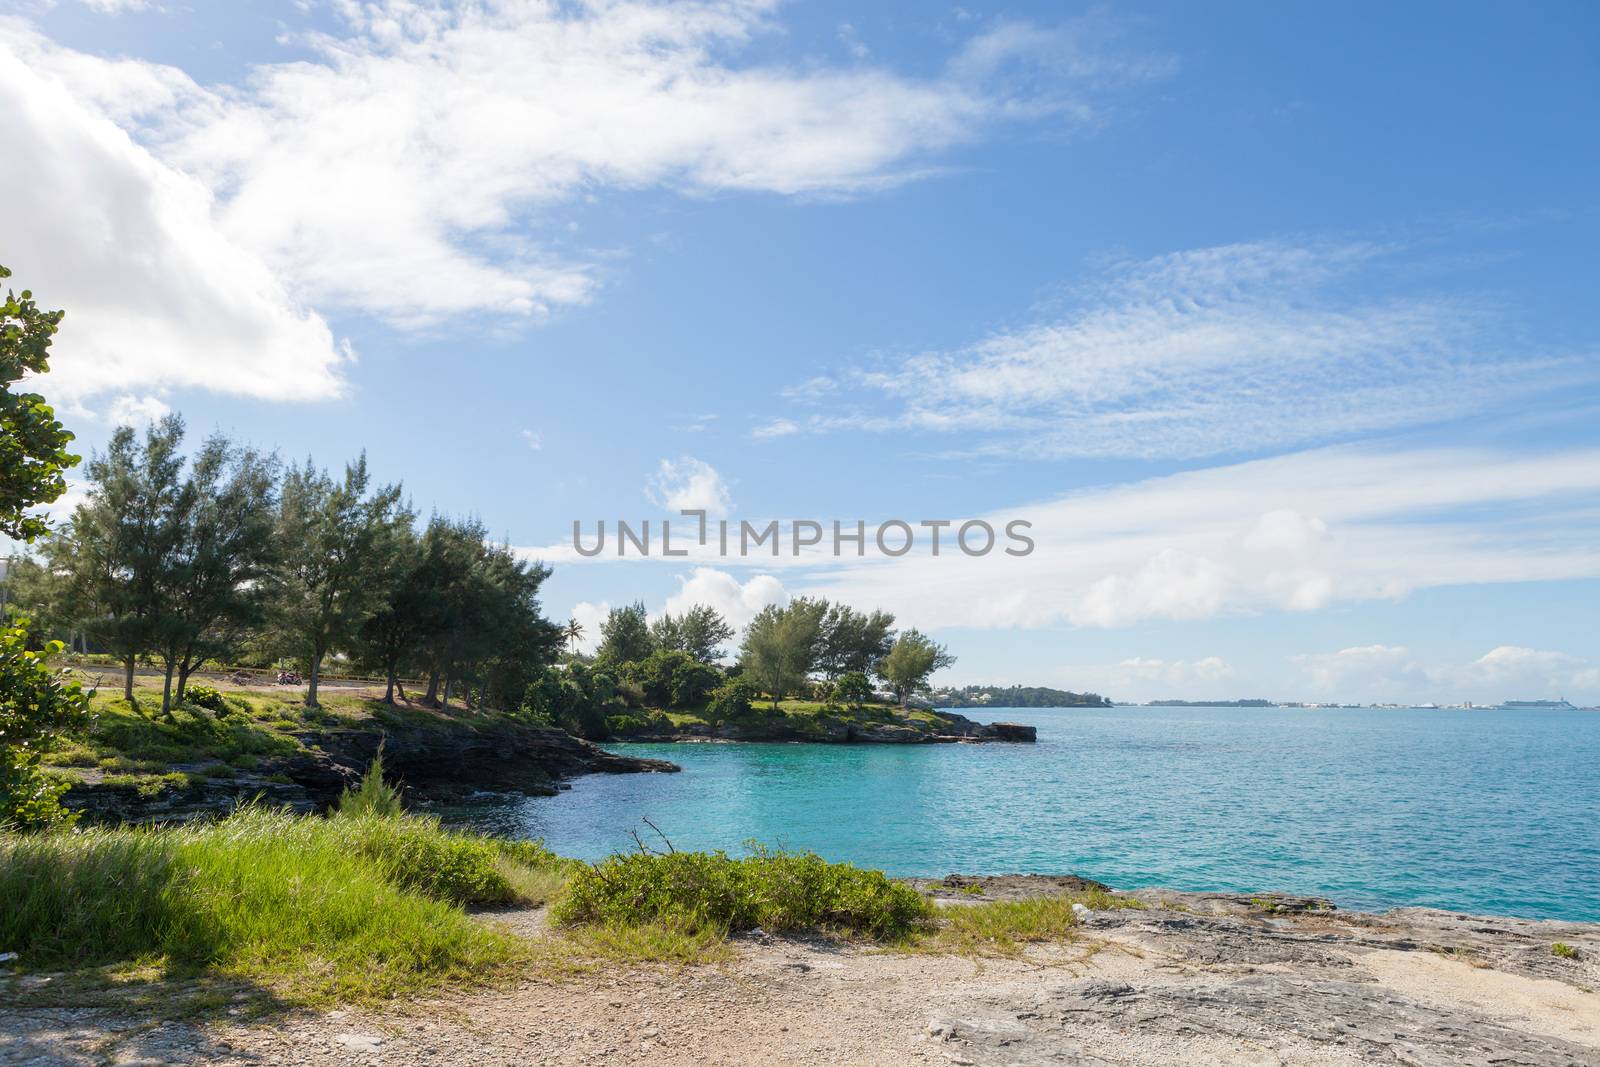 Bermuda Coast Rock Formations by graficallyminded